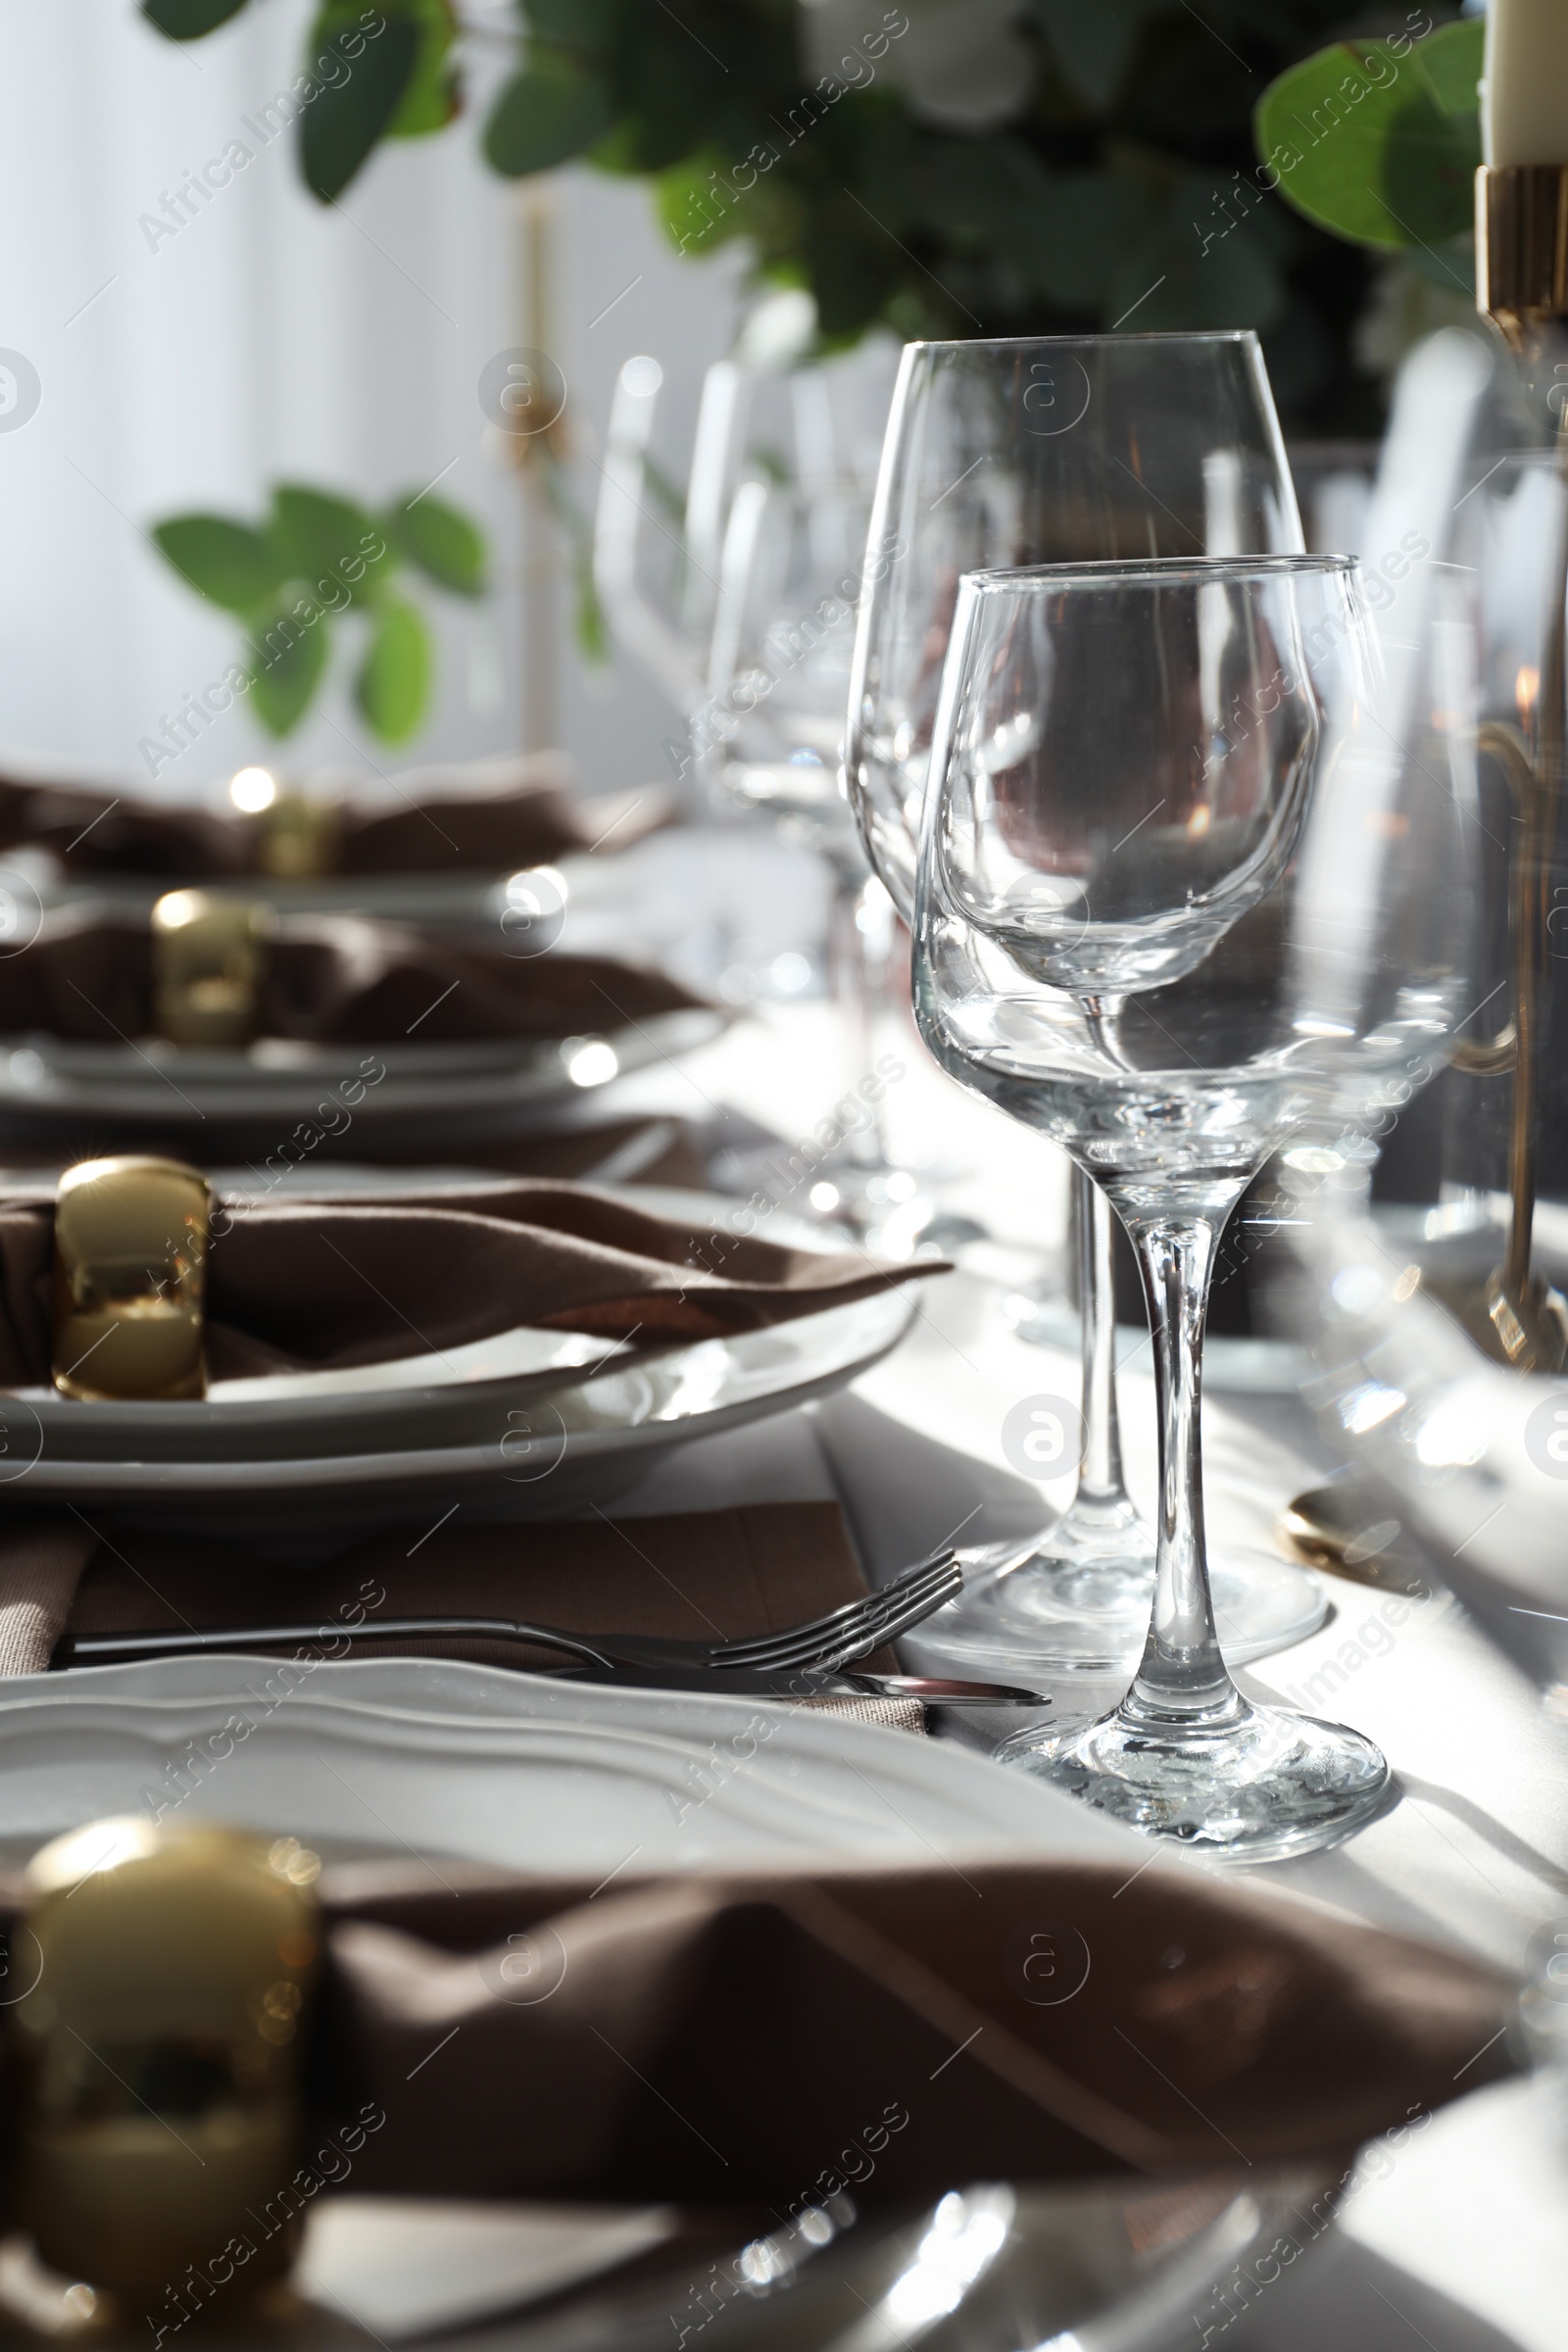 Photo of Festive table setting with beautiful decor indoors